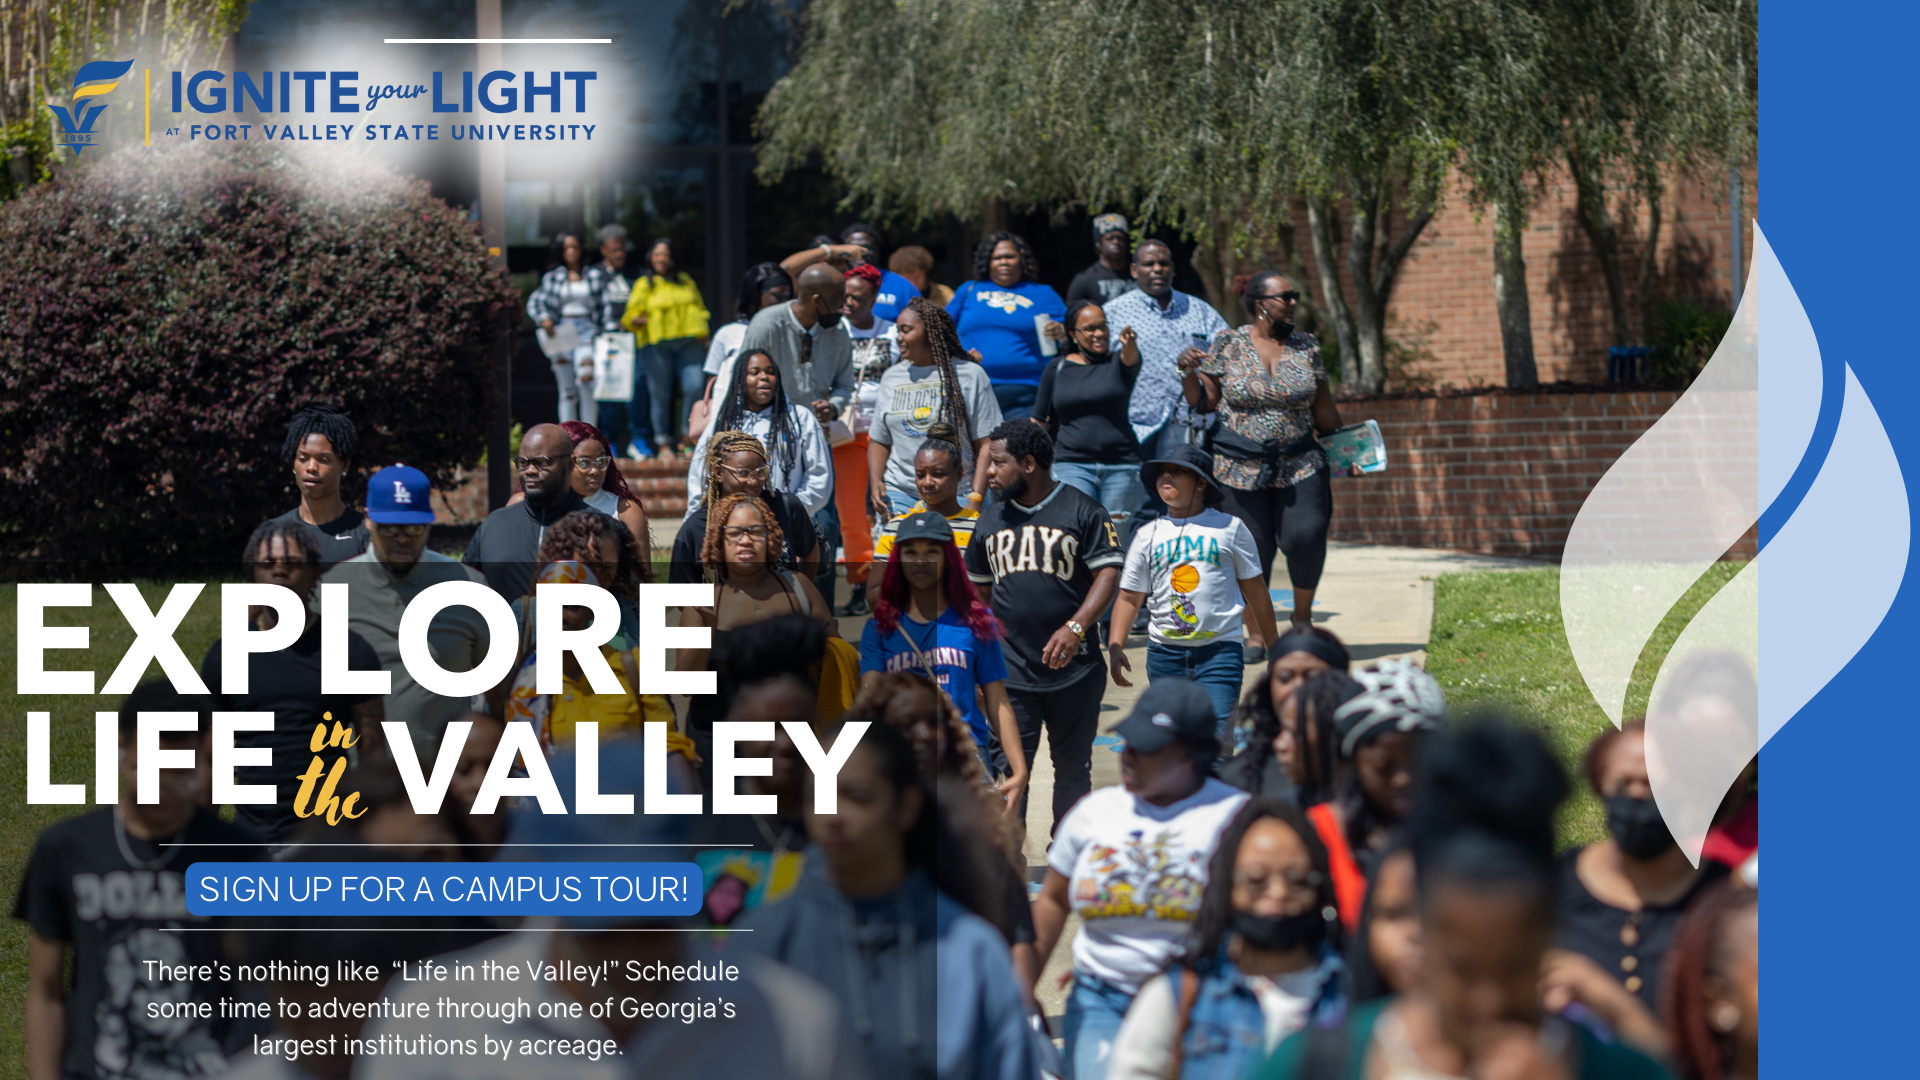 Students, families, and staff gather on a campus tour at Fort Valley State University